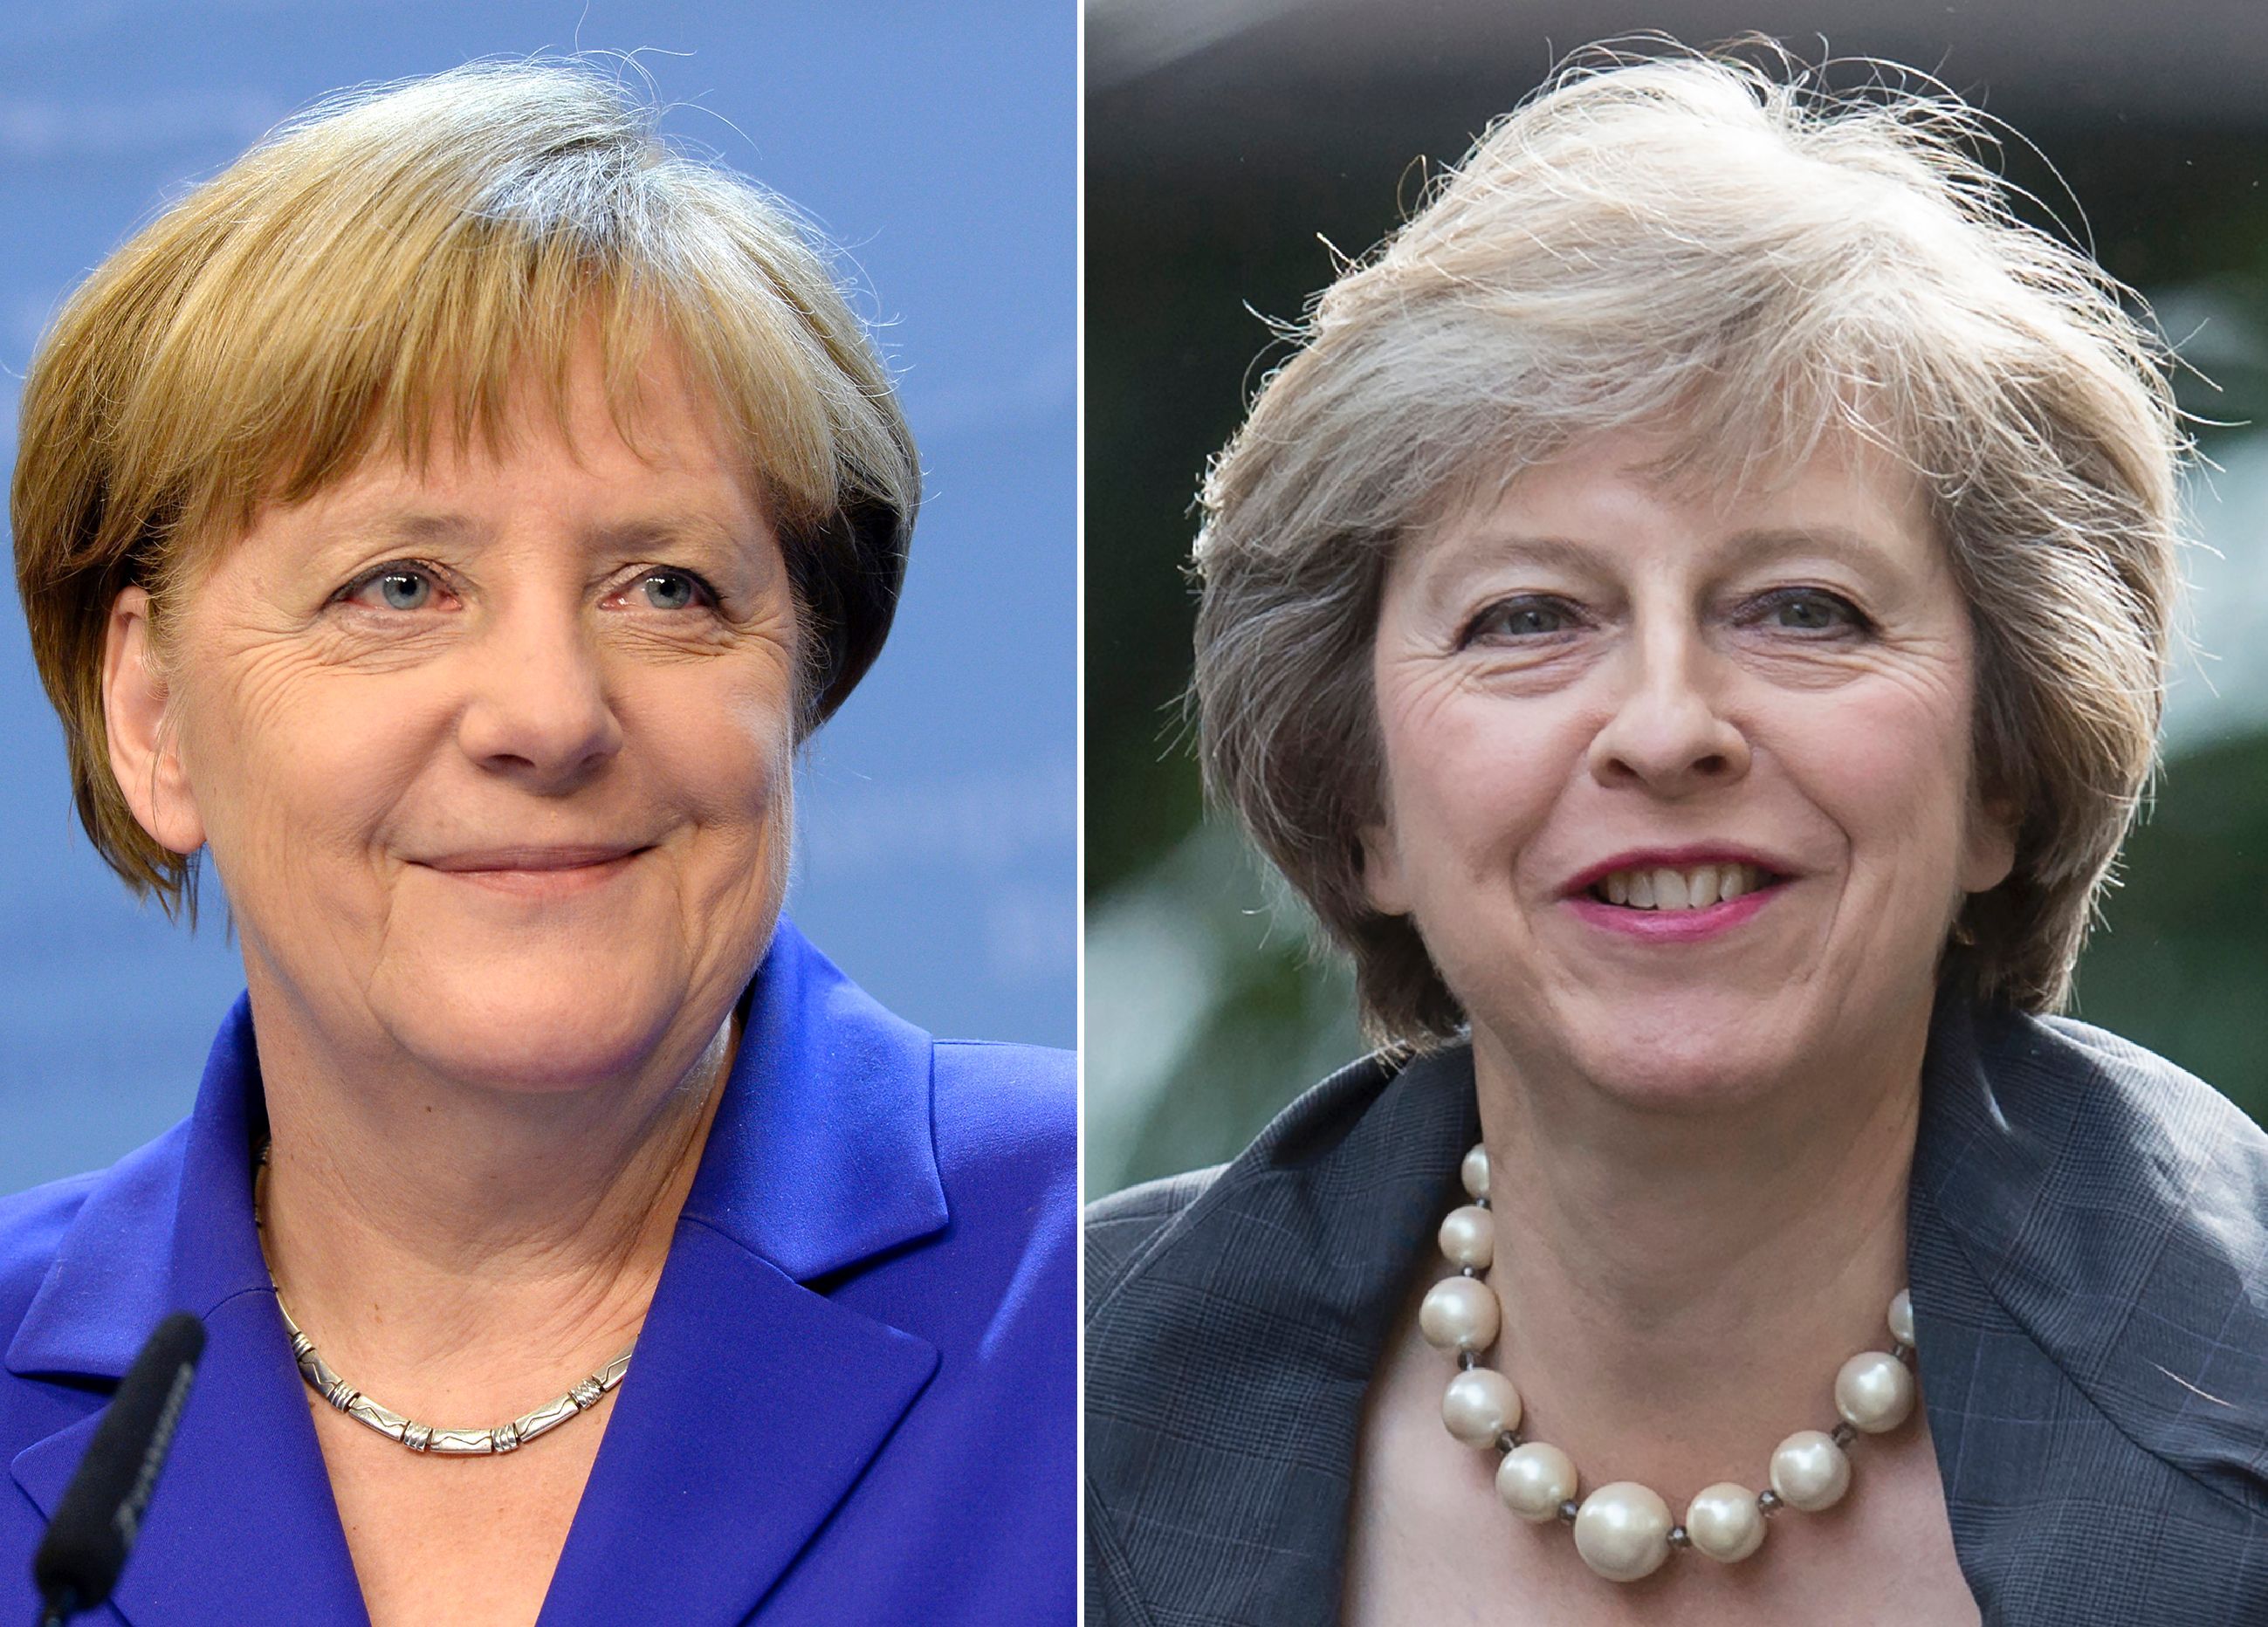 Brexit: May hopes for ‘frank and open’ talks during Merkel visit